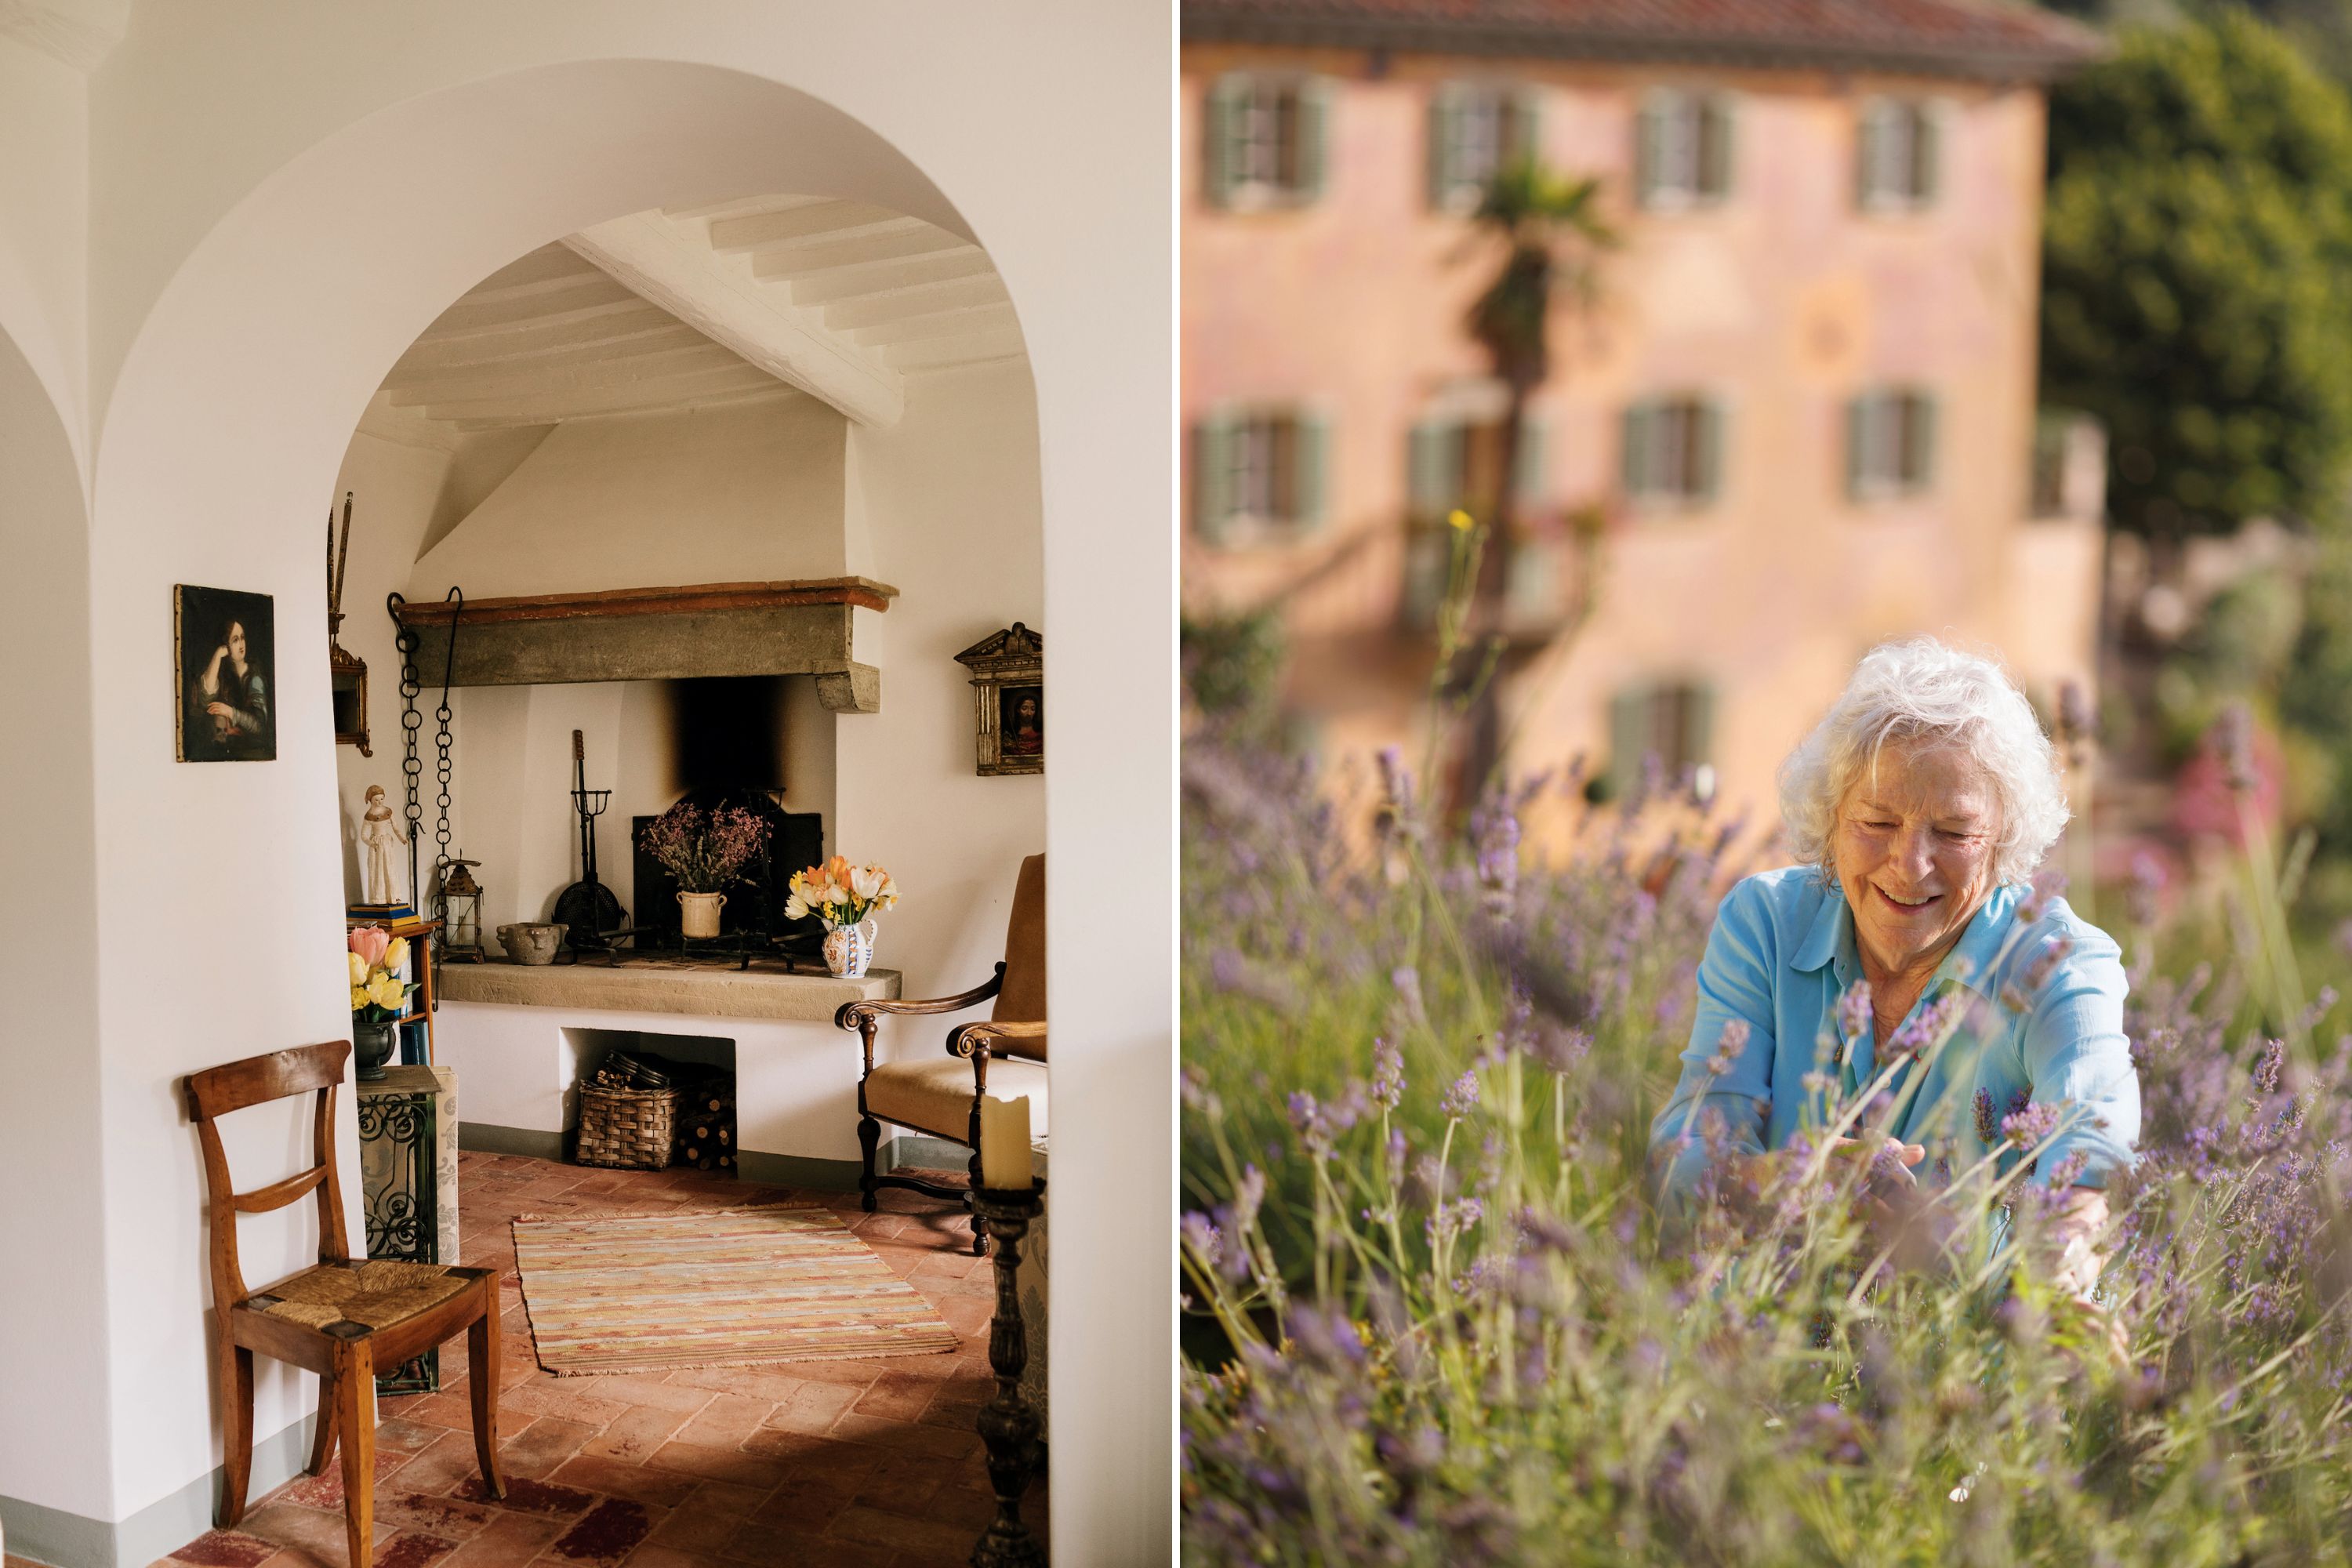 Inside an Italian home with a brick floor and fireplace; a woman harvests lavender in a field.